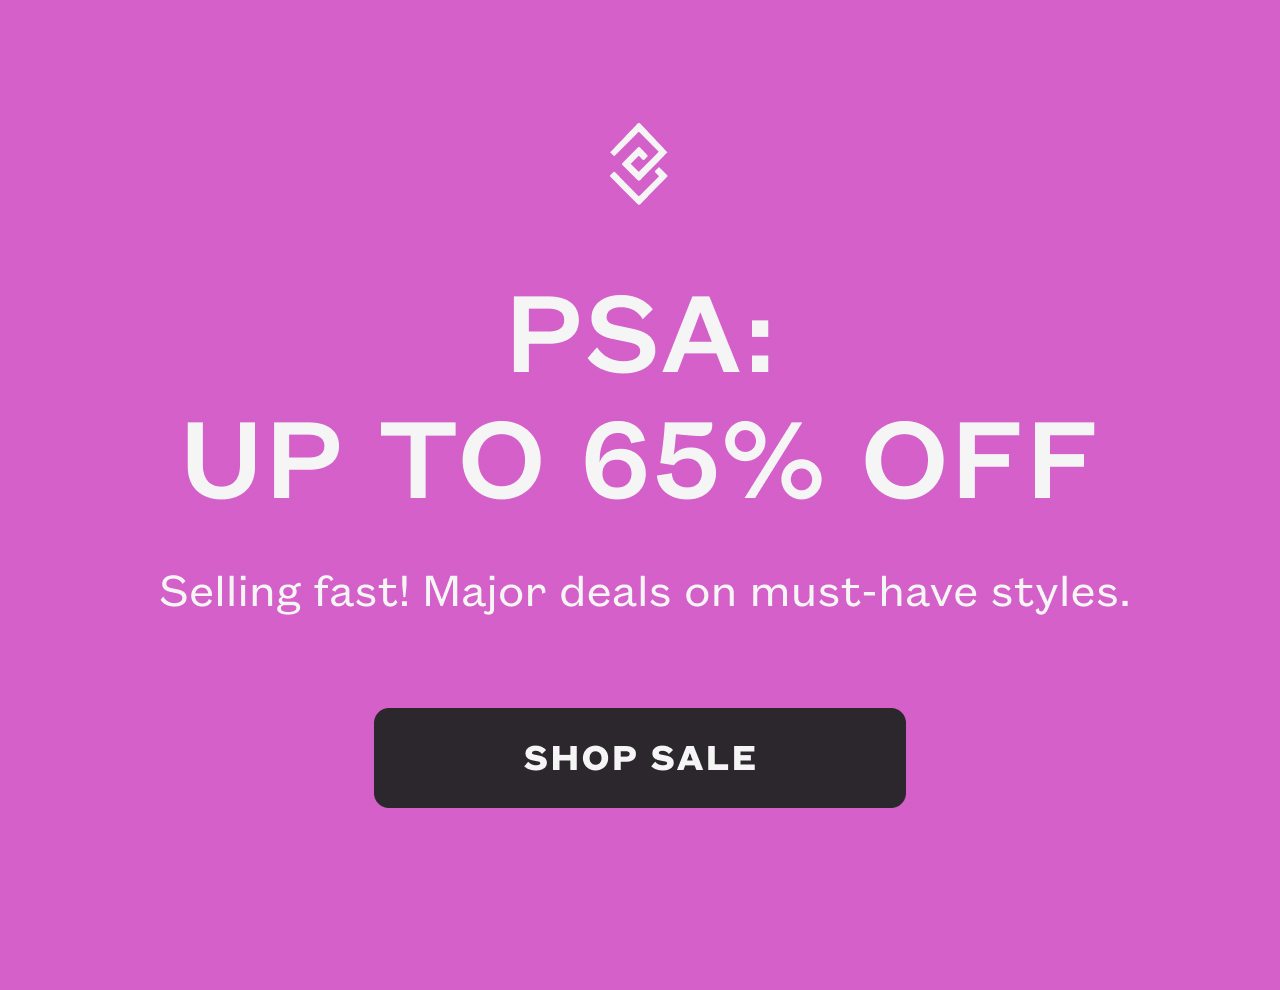 UP TO 65% OFF